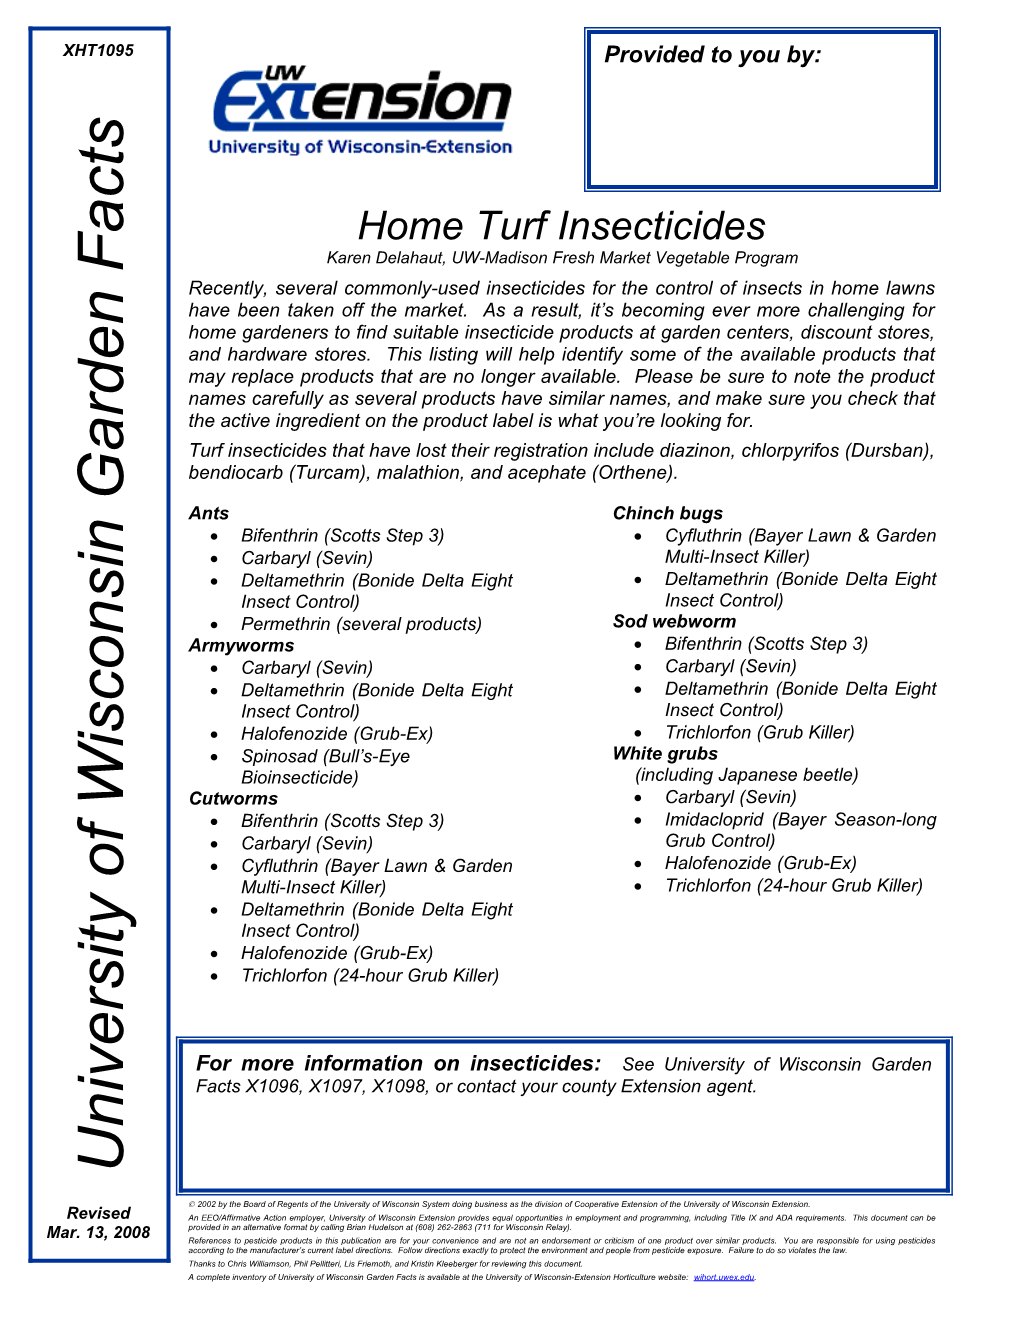 Home Turf Insecticides